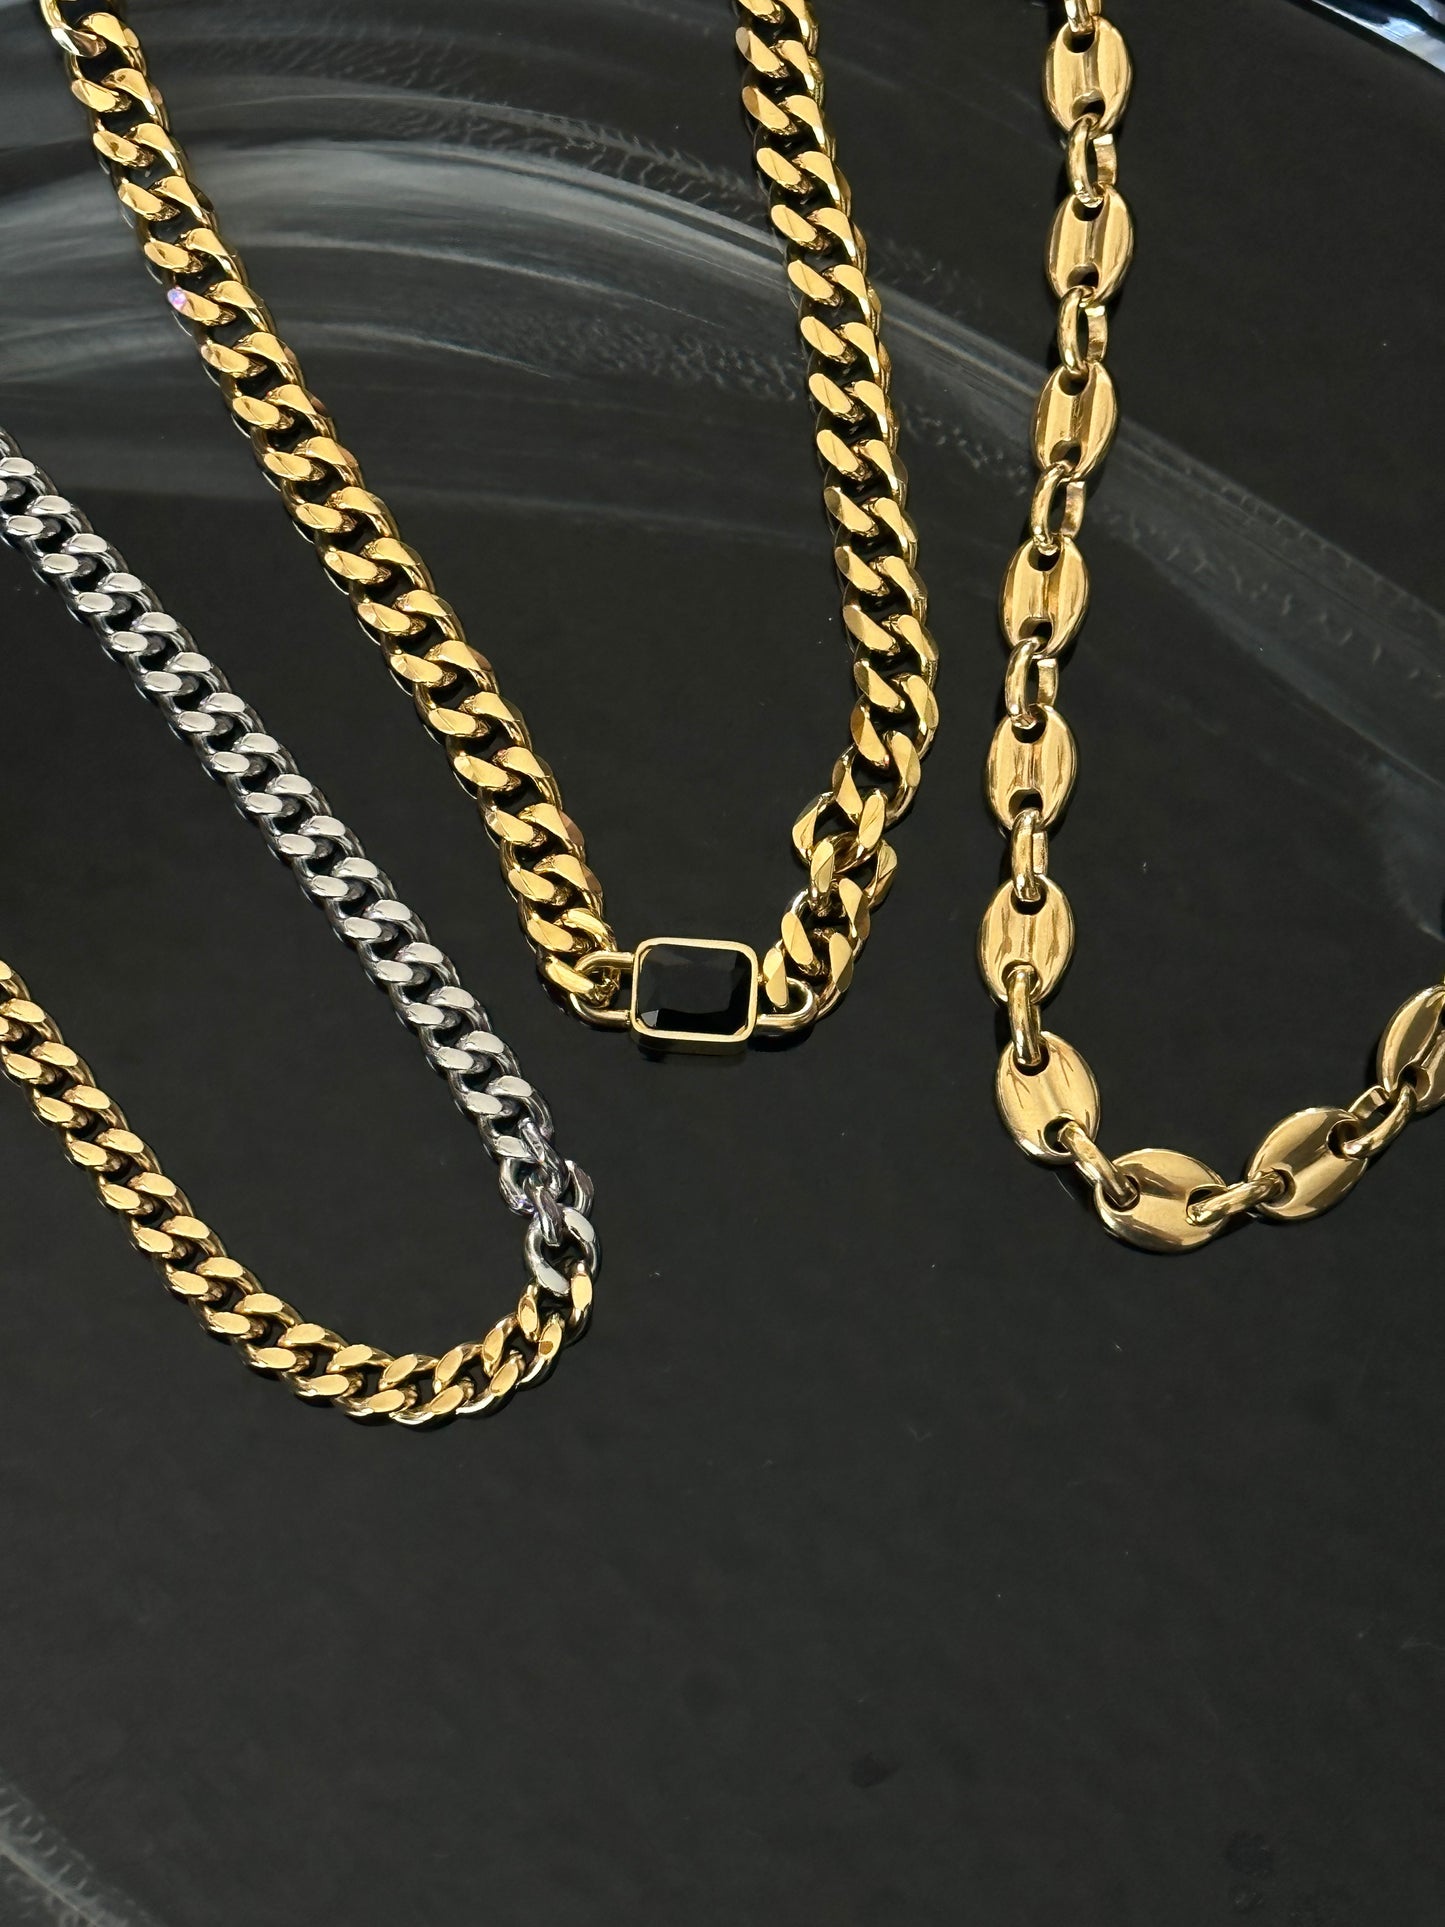 The Taylor Chain Necklace